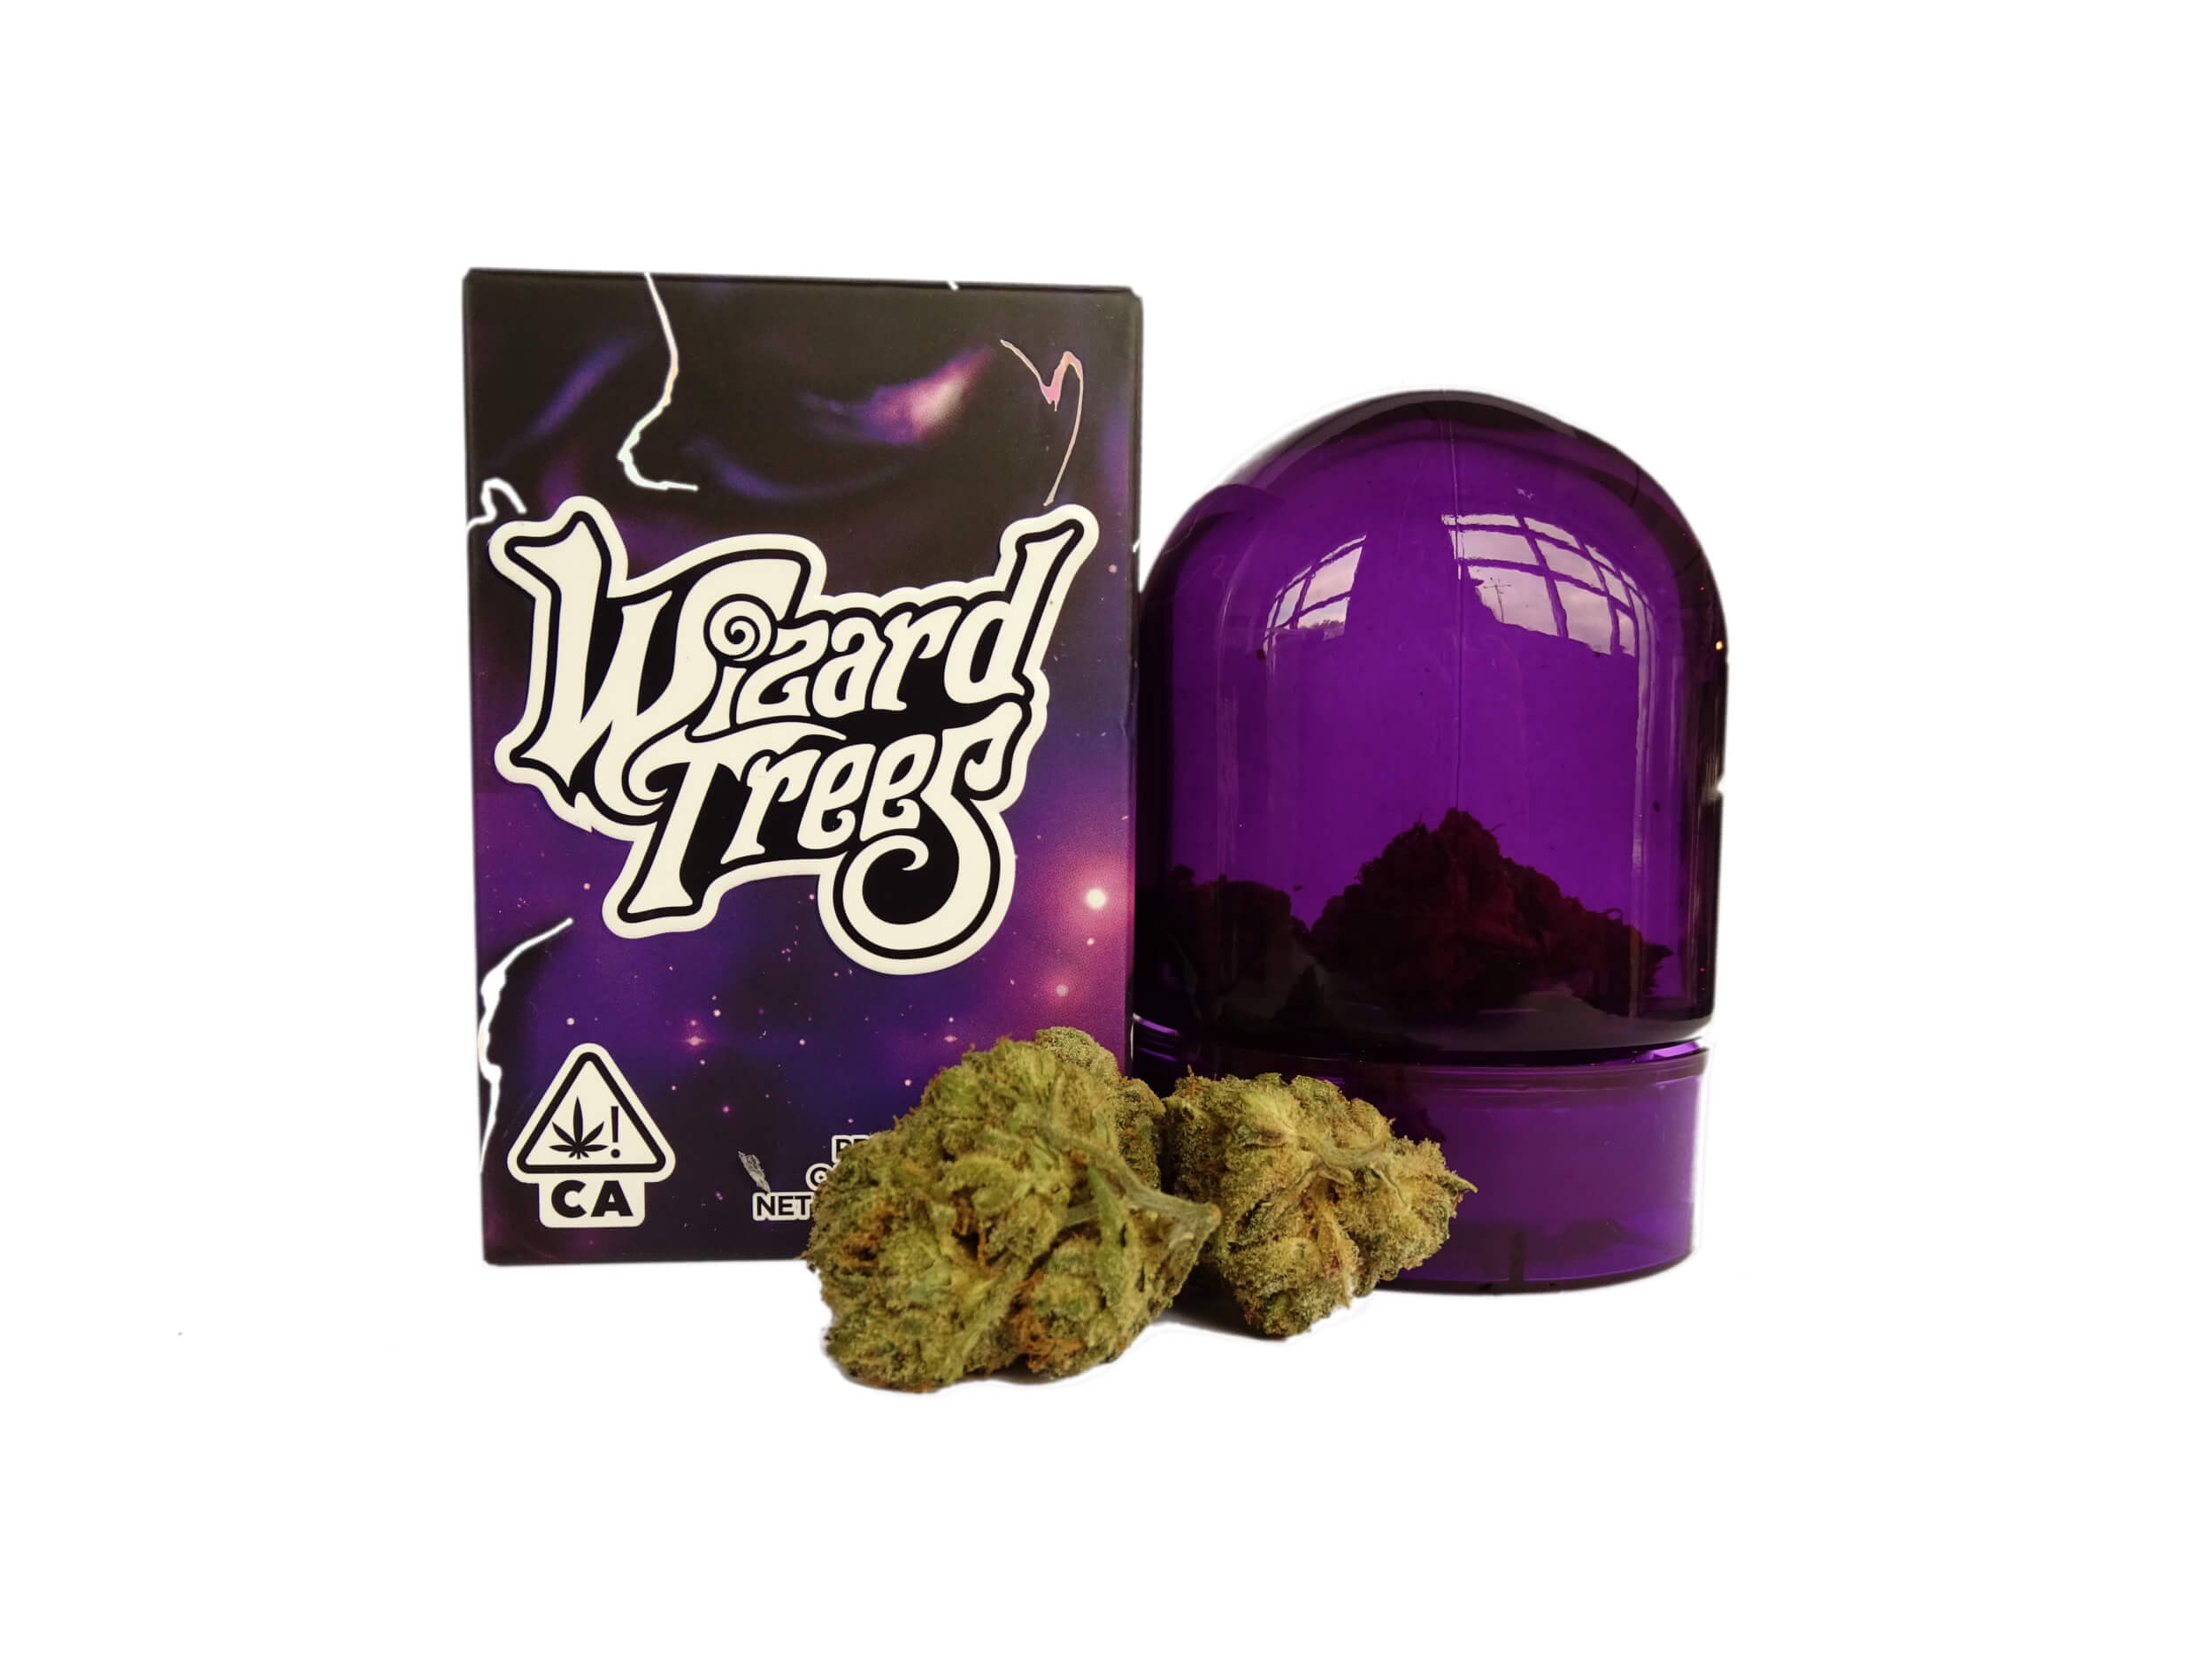 https://gothammeds.com/wp-content/uploads/2023/05/WIZARD-TREES-BOX-WITH-FLOWER-COVER-1.jpg